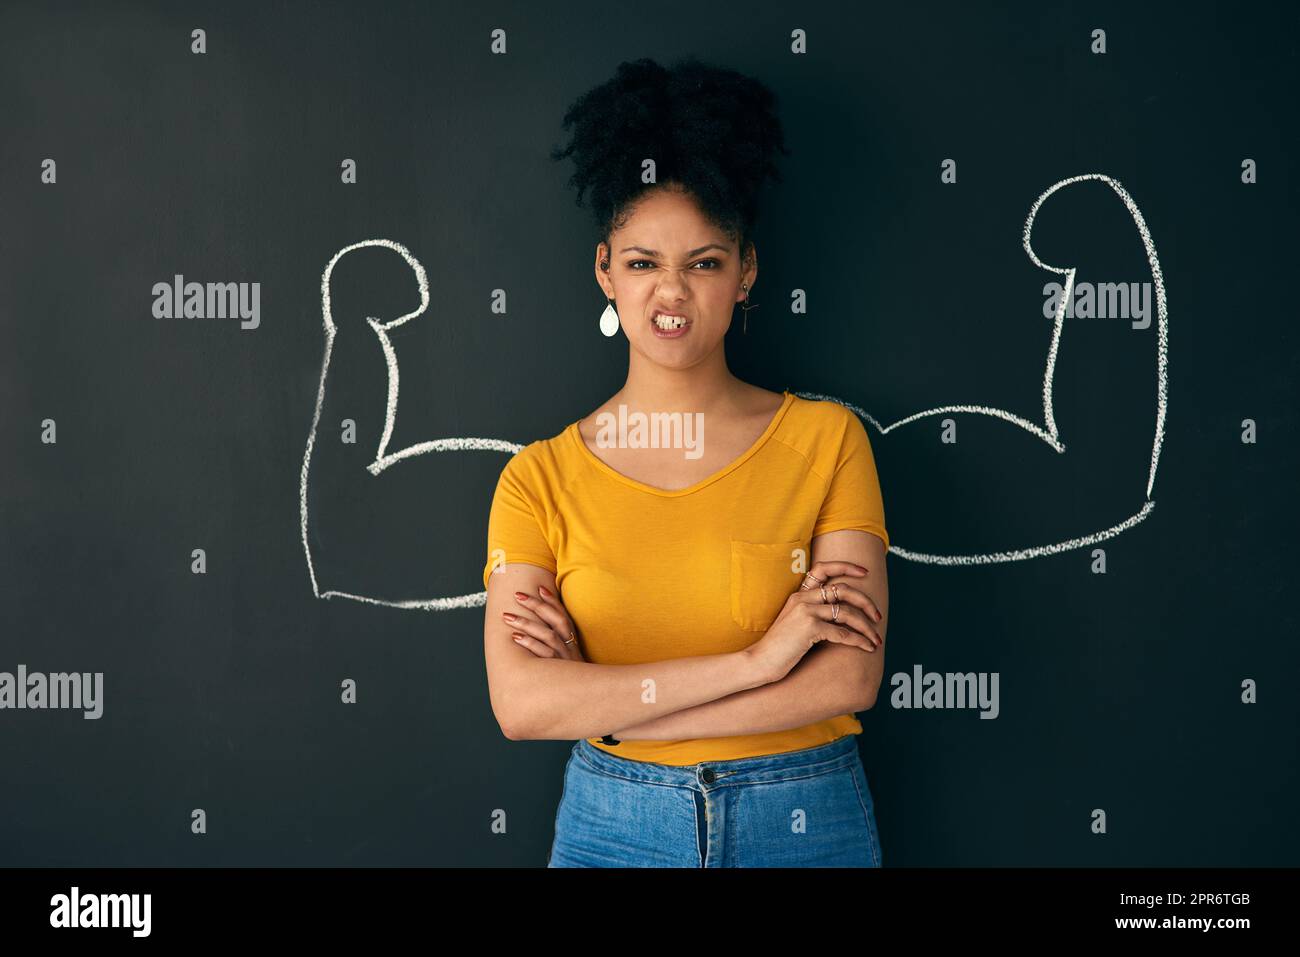 Sometimes being strong is the only choice you have. Shot of a woman posing with a chalk illustration of flexing muscles against a dark background. Stock Photo